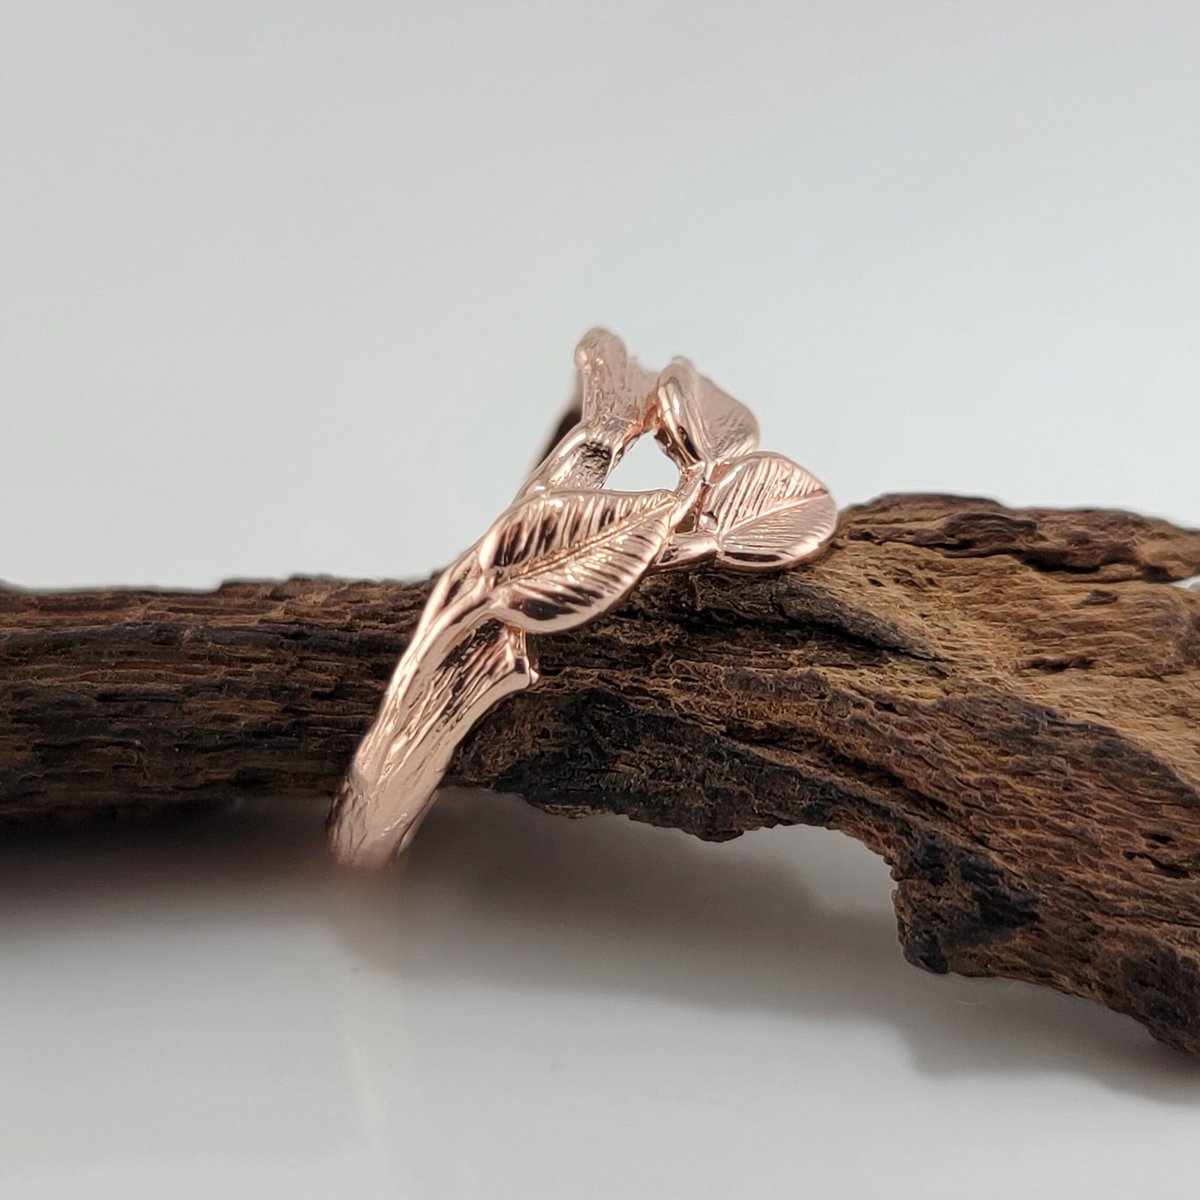 Leaf and Twig Wedding Band - Gold Ring - Statement Ring - Anniversary - by DV Jewelry Designs etsy.me/46aouNw
 #LeafRing #PromiseRing